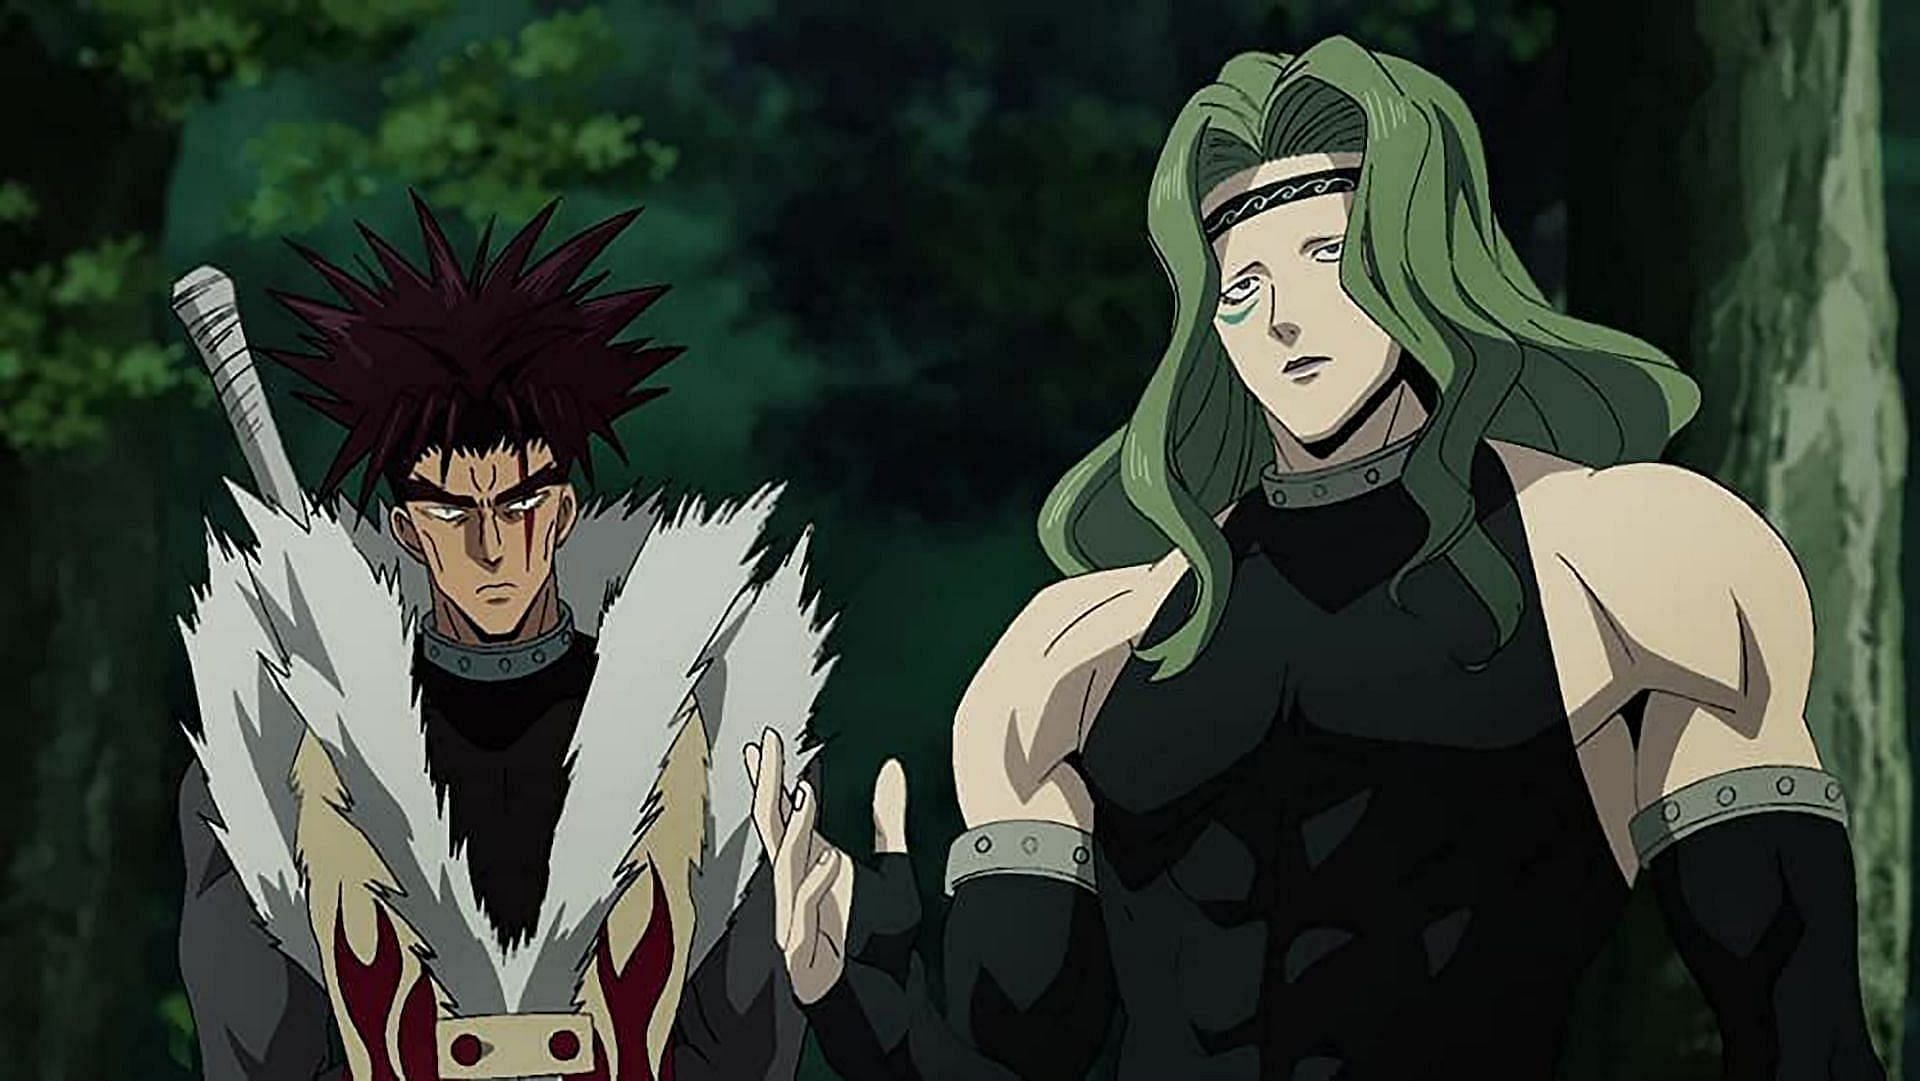 Hellfire Flame and Gale Wind as seen in One Punch Man (Image via J.C.Staff)